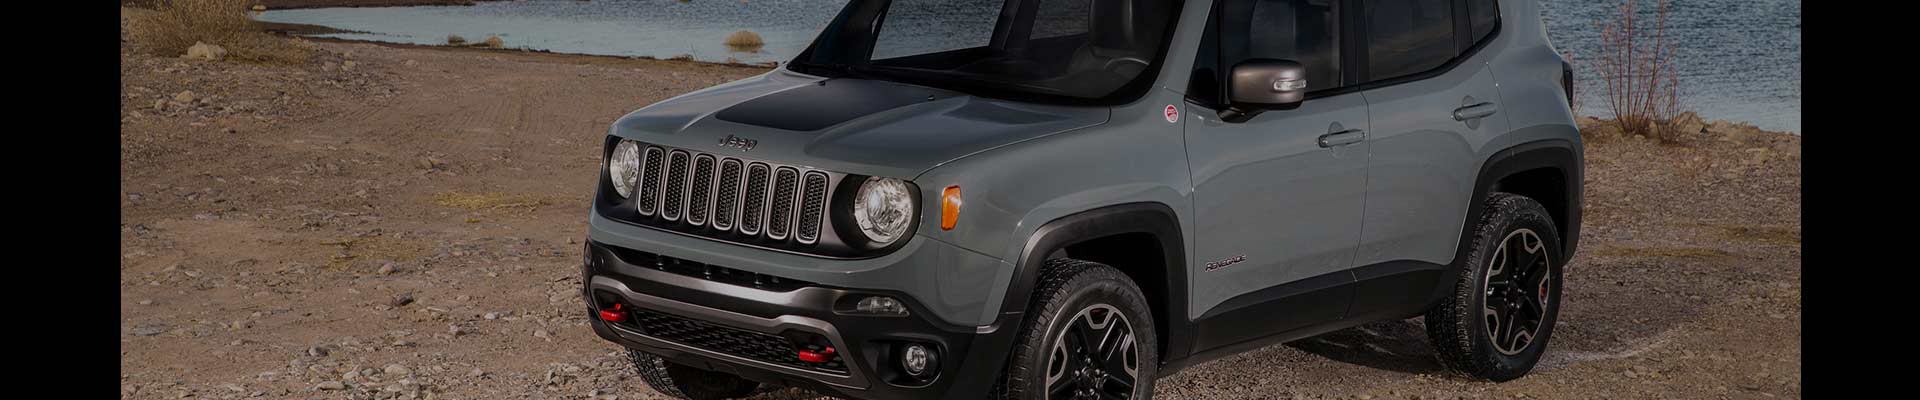 Shop Replacement and OEM 2021 Jeep Renegade Parts with Discounted Price on the Net